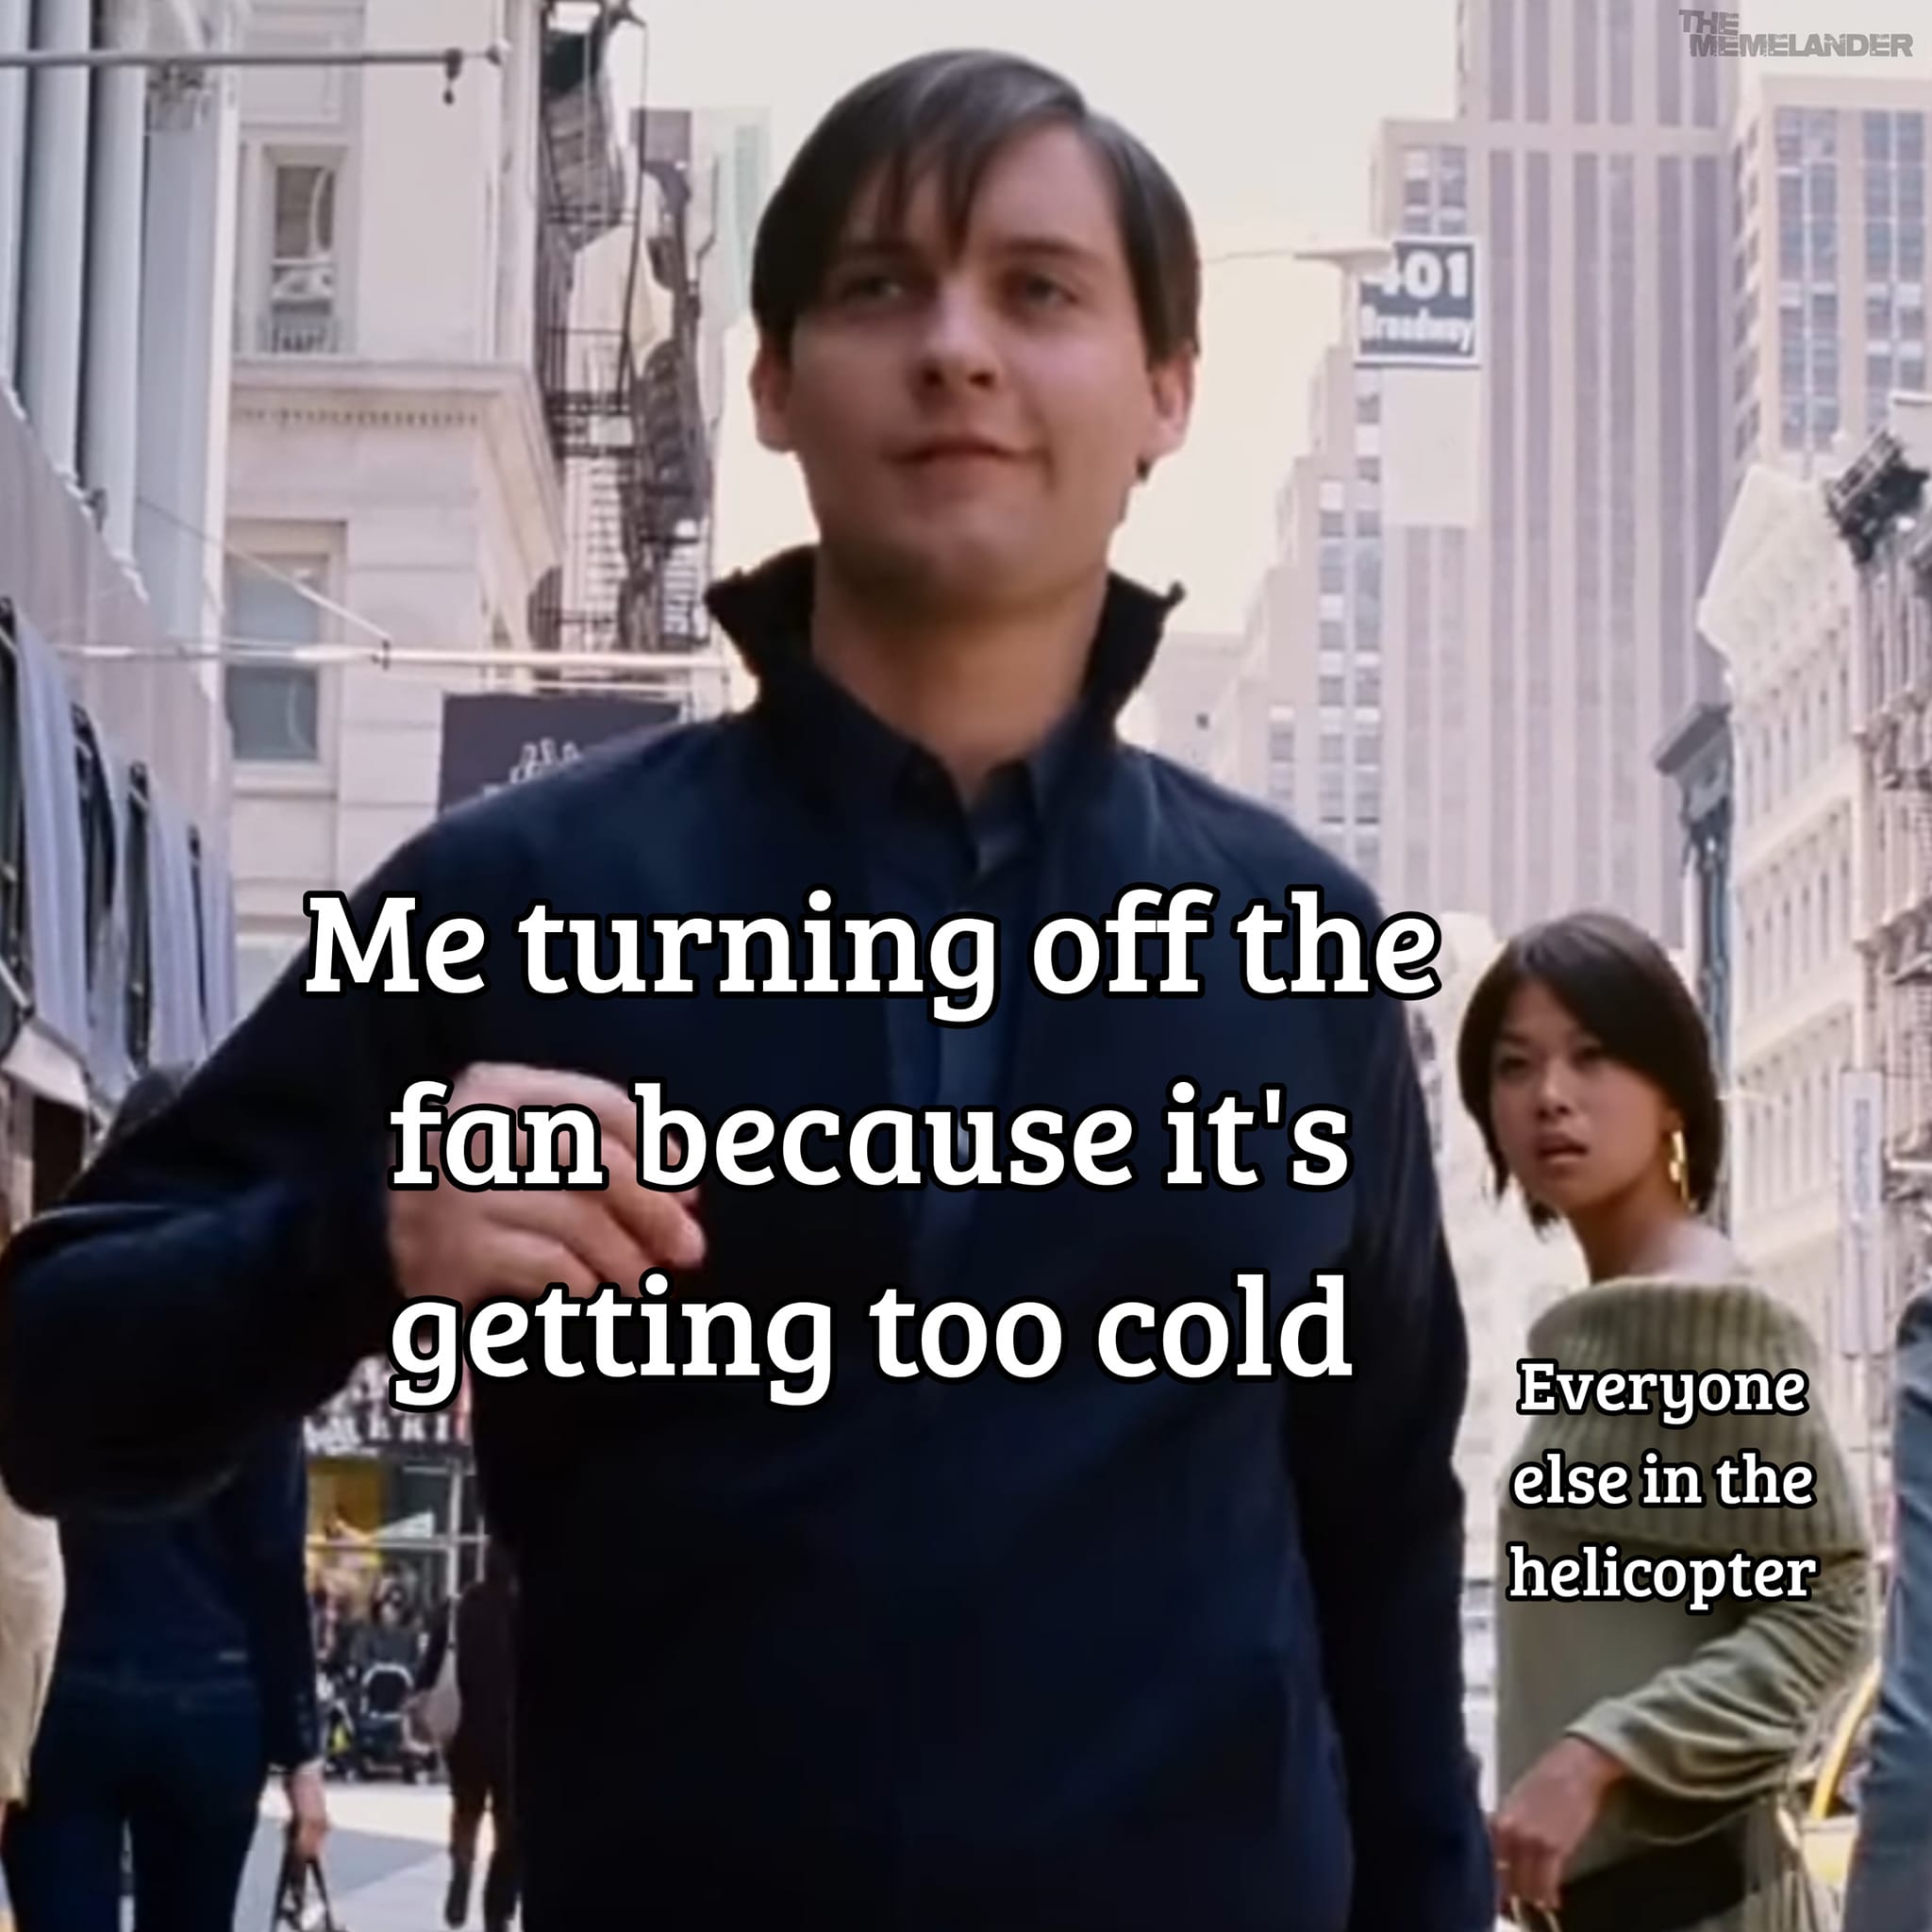 funny and dank memes - realizing 5 year old me was right - 401 Broadway Me turning off the fan because it's getting too cold The Memelander Everyone else in the helicopter